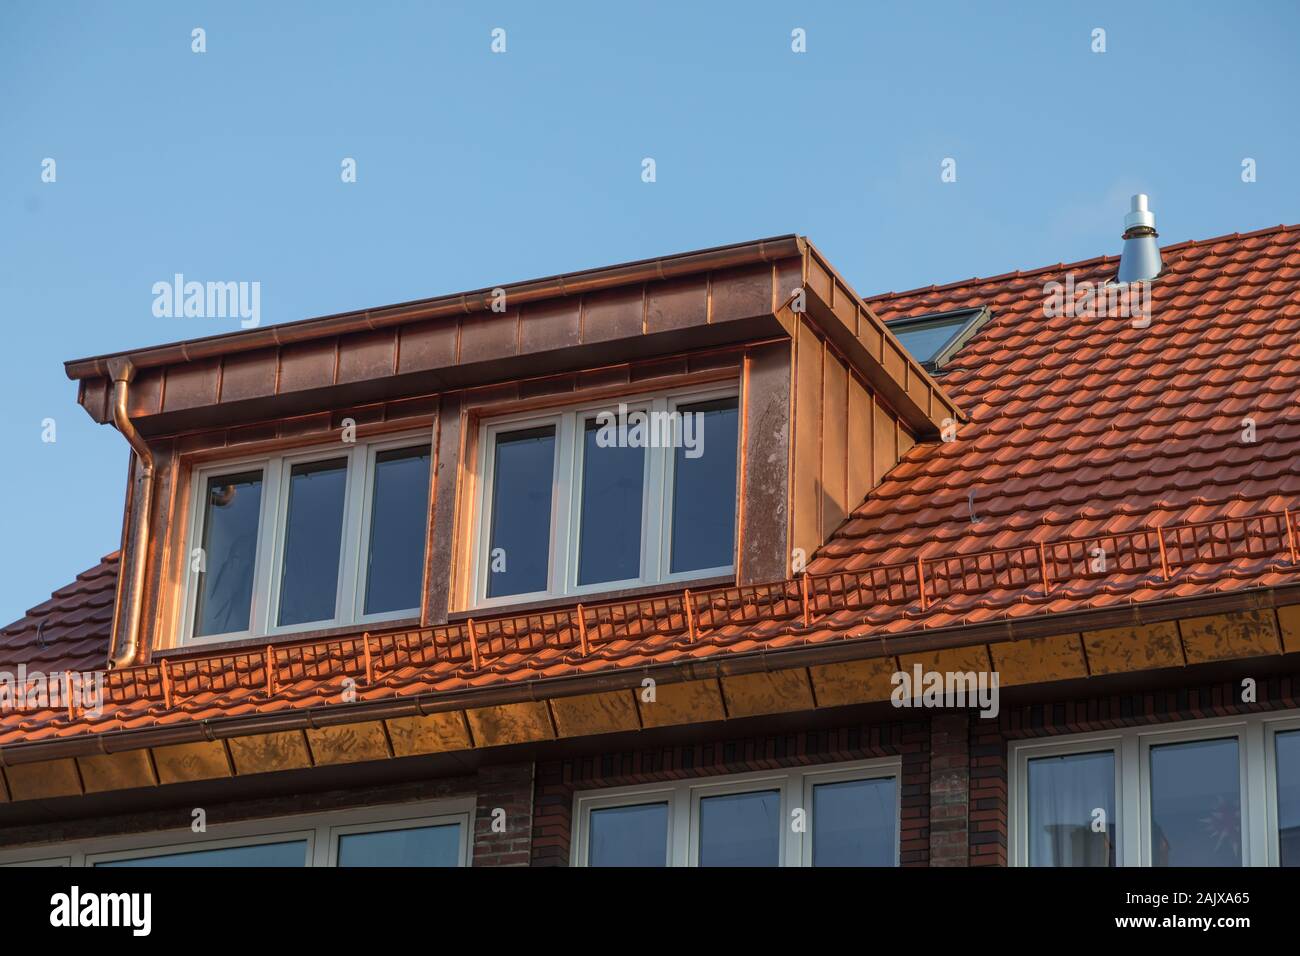 large copper dormer on rooftop Stock Photo